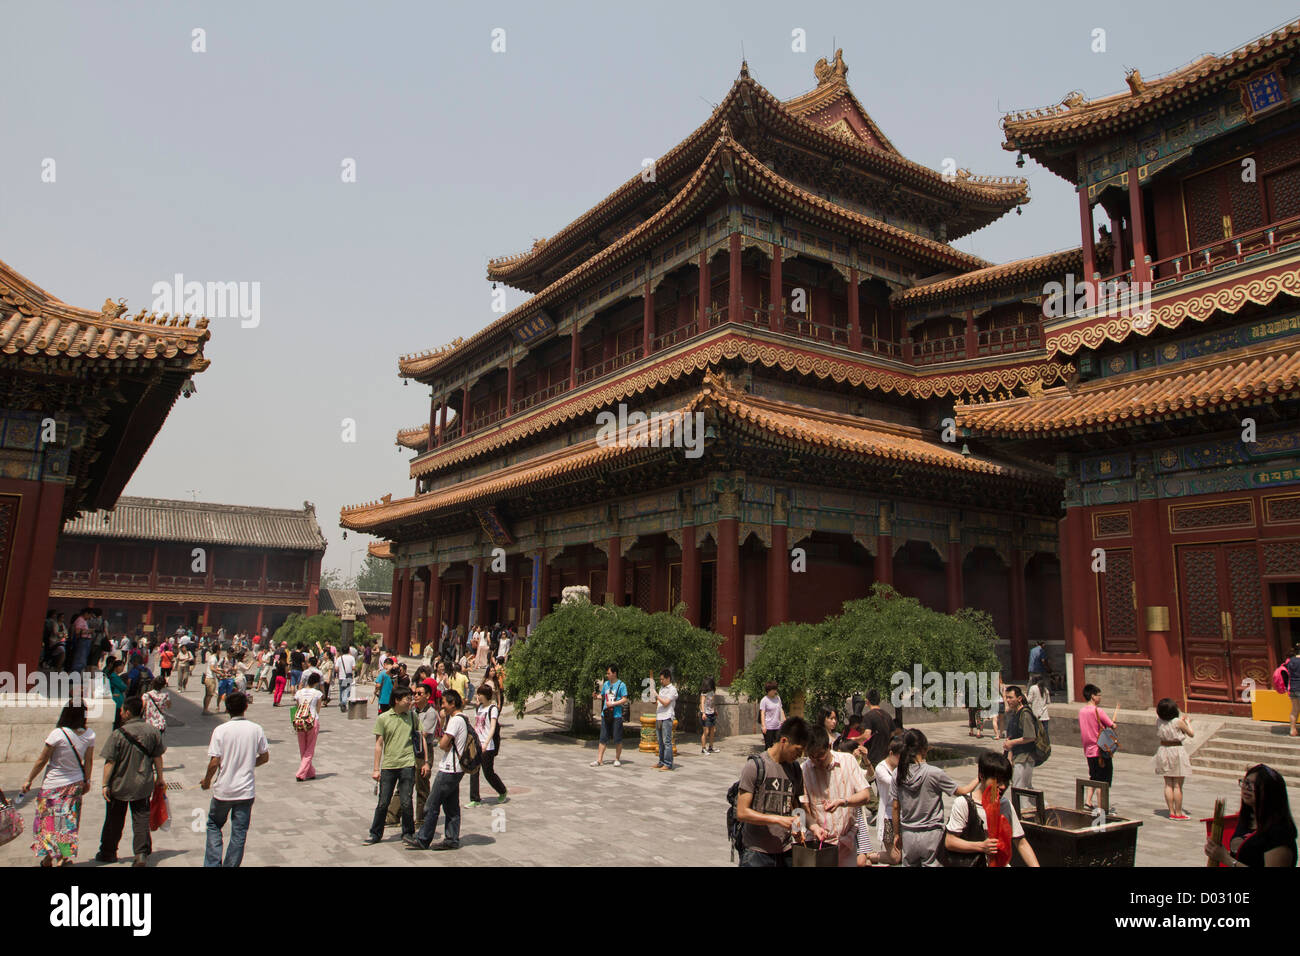 Visitors mingling outside the temples at the Lama Temple in Beijing, China. Stock Photo